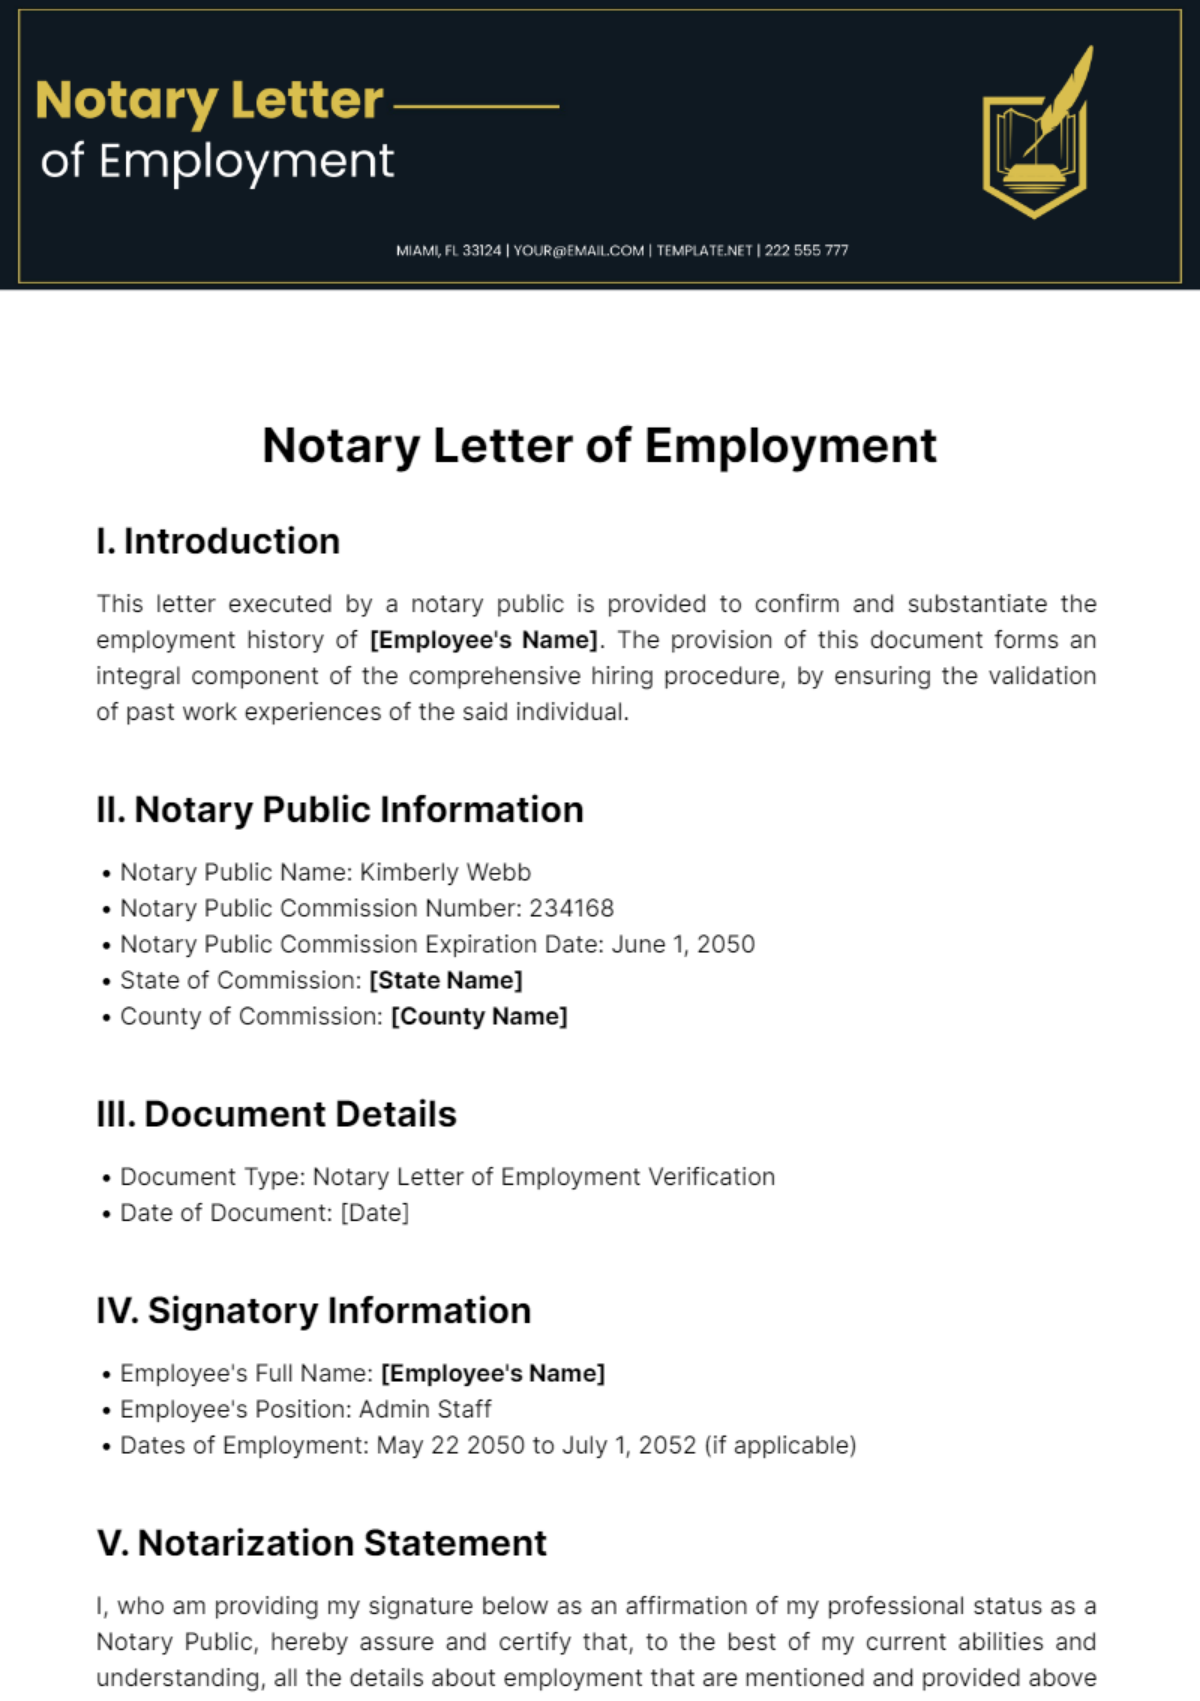 Free Notary Letter of Employment Template